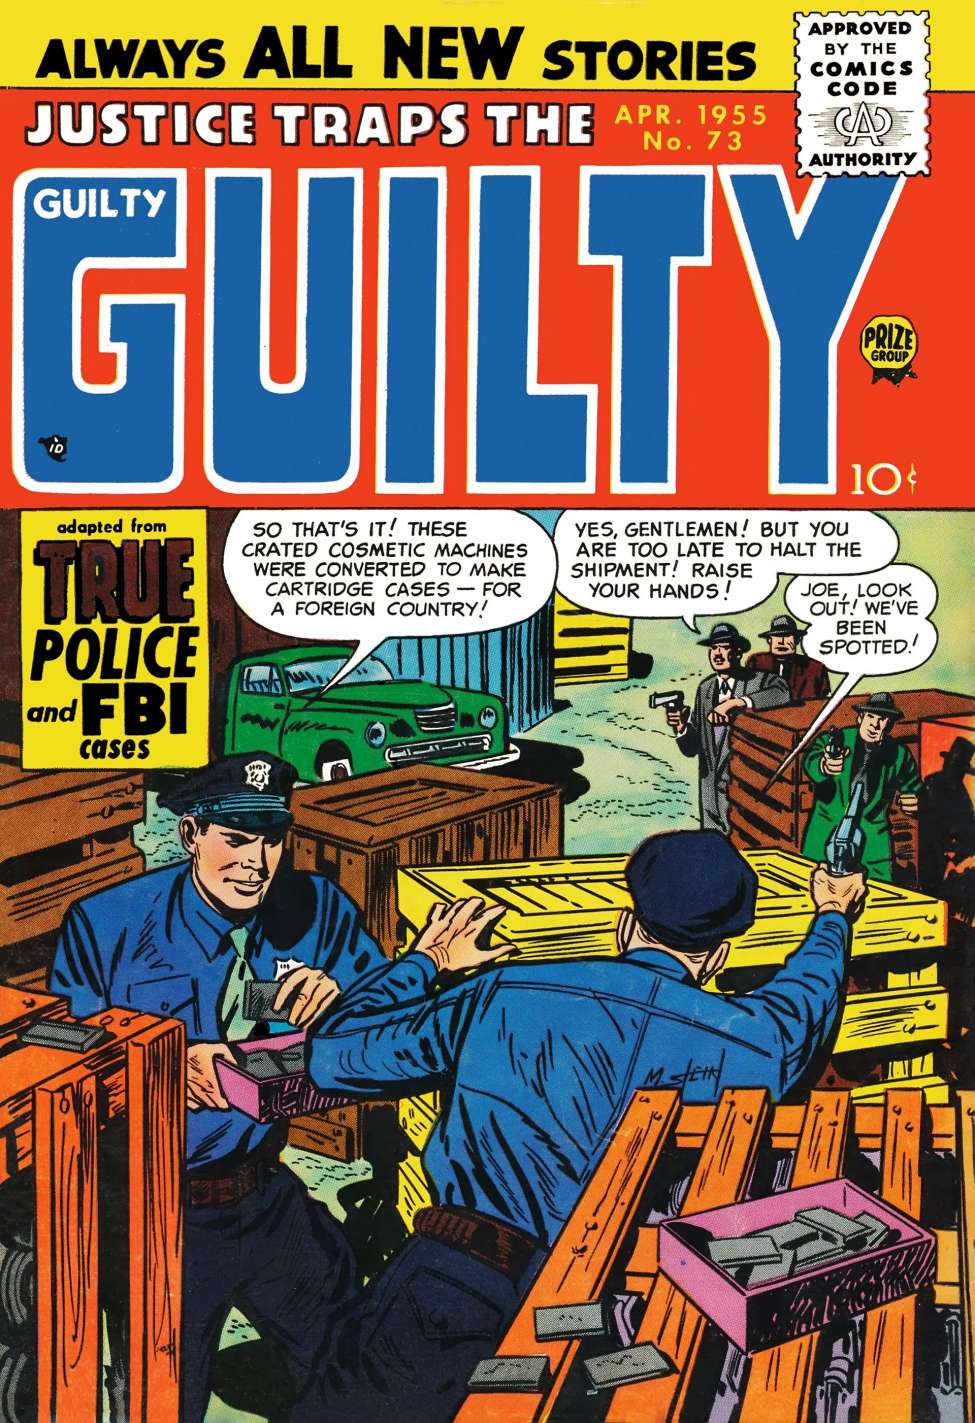 Book Cover For Justice Traps the Guilty 73 - Version 1